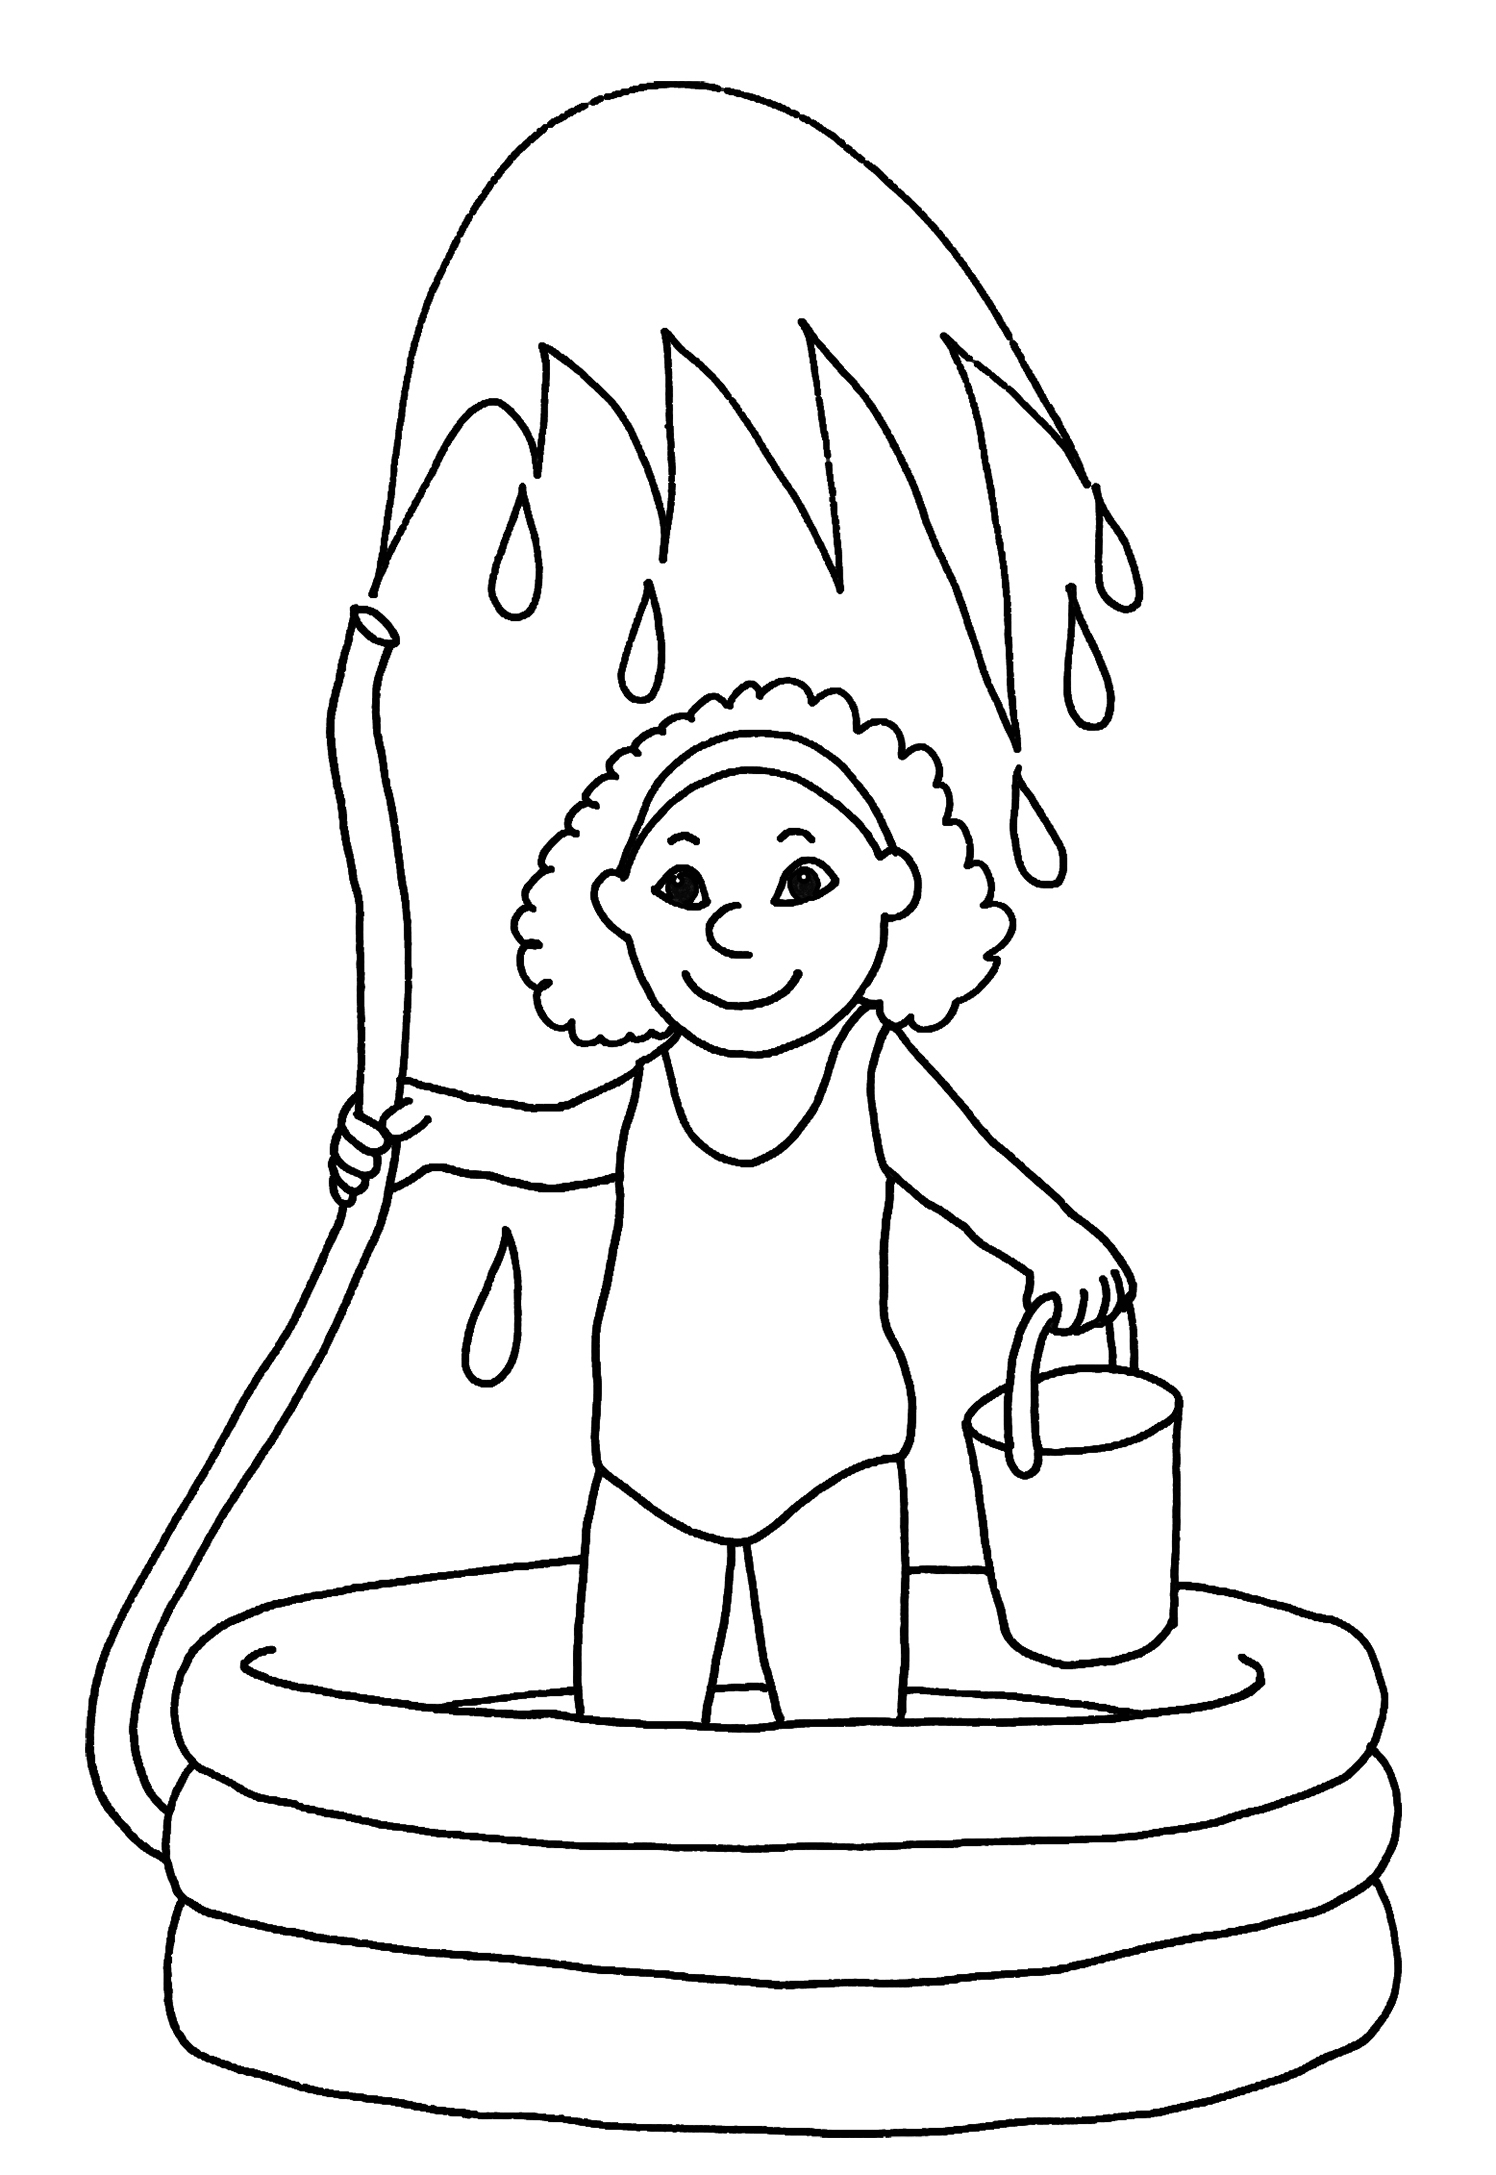 summer kids cute coloring pages for girls